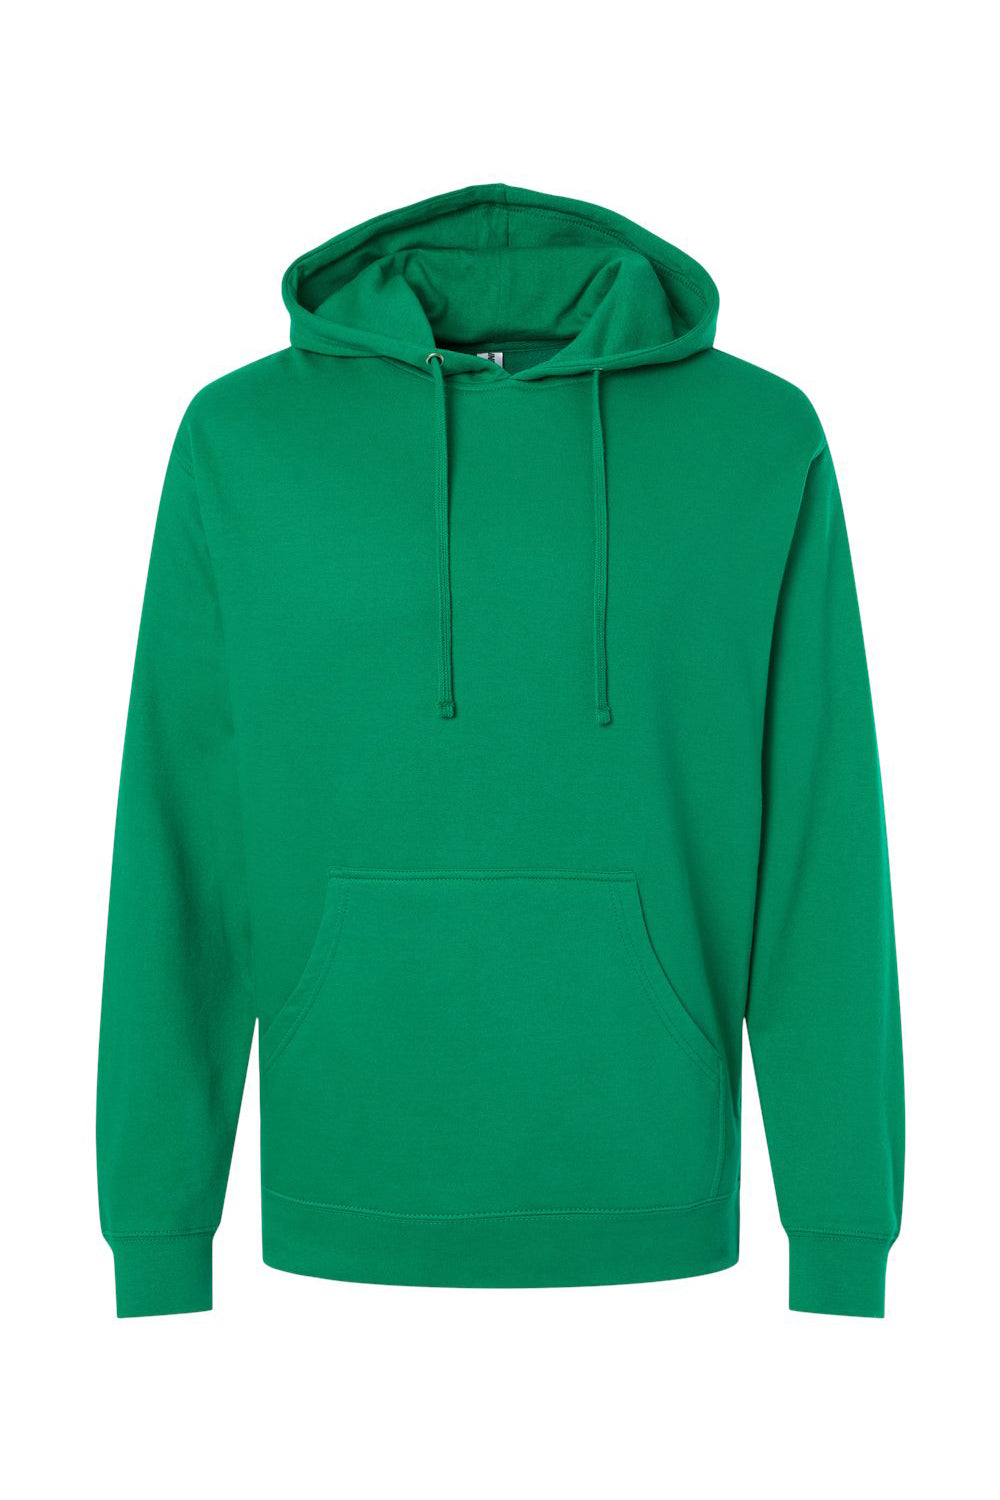 Independent Trading Co. SS4500 Mens Hooded Sweatshirt Hoodie Kelly Green Flat Front